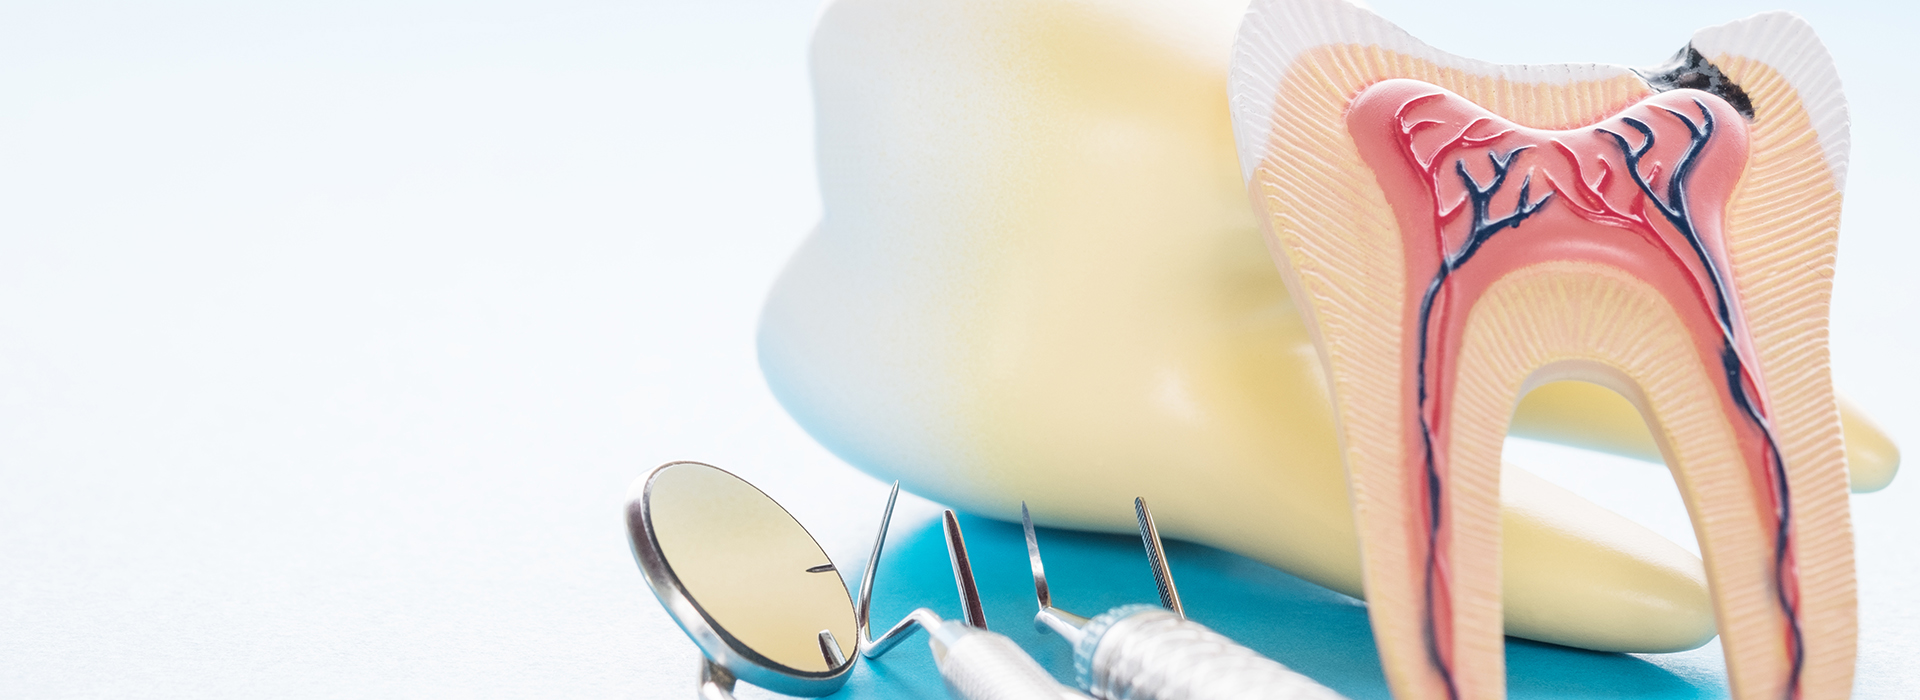 Modern Dental Care of Queens | Root Canals, All-on-4 reg  and ZOOM  Whitening